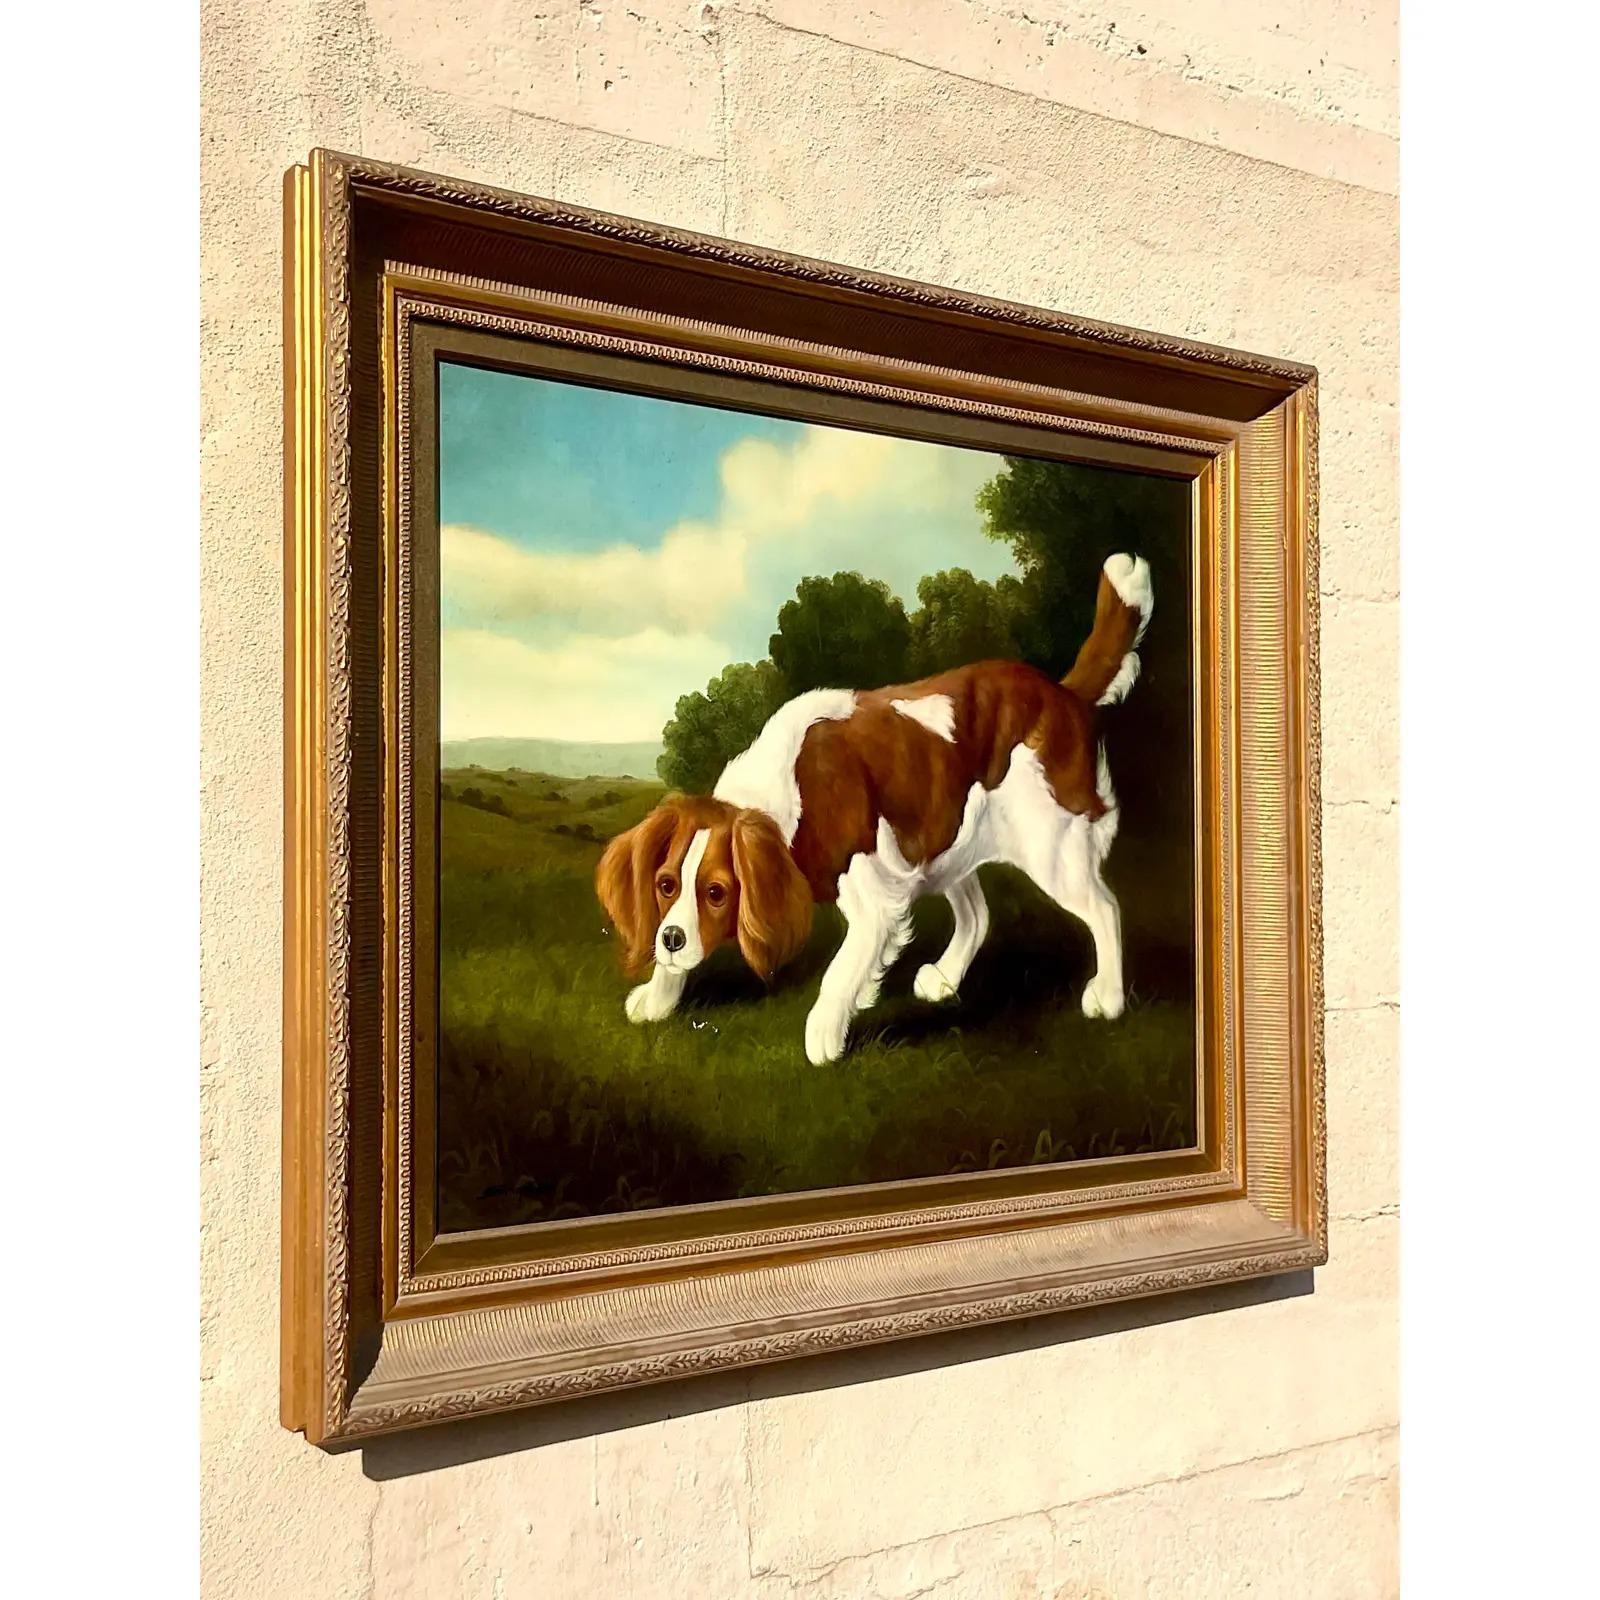 A gorgeous vintage Regency signed original oil painting on canvas. Beautiful deep colors on this composition of a handsome Spaniel. Heavy gilt frame. Signed by the artist Shipley. Acquired from a Palm Beach estate.